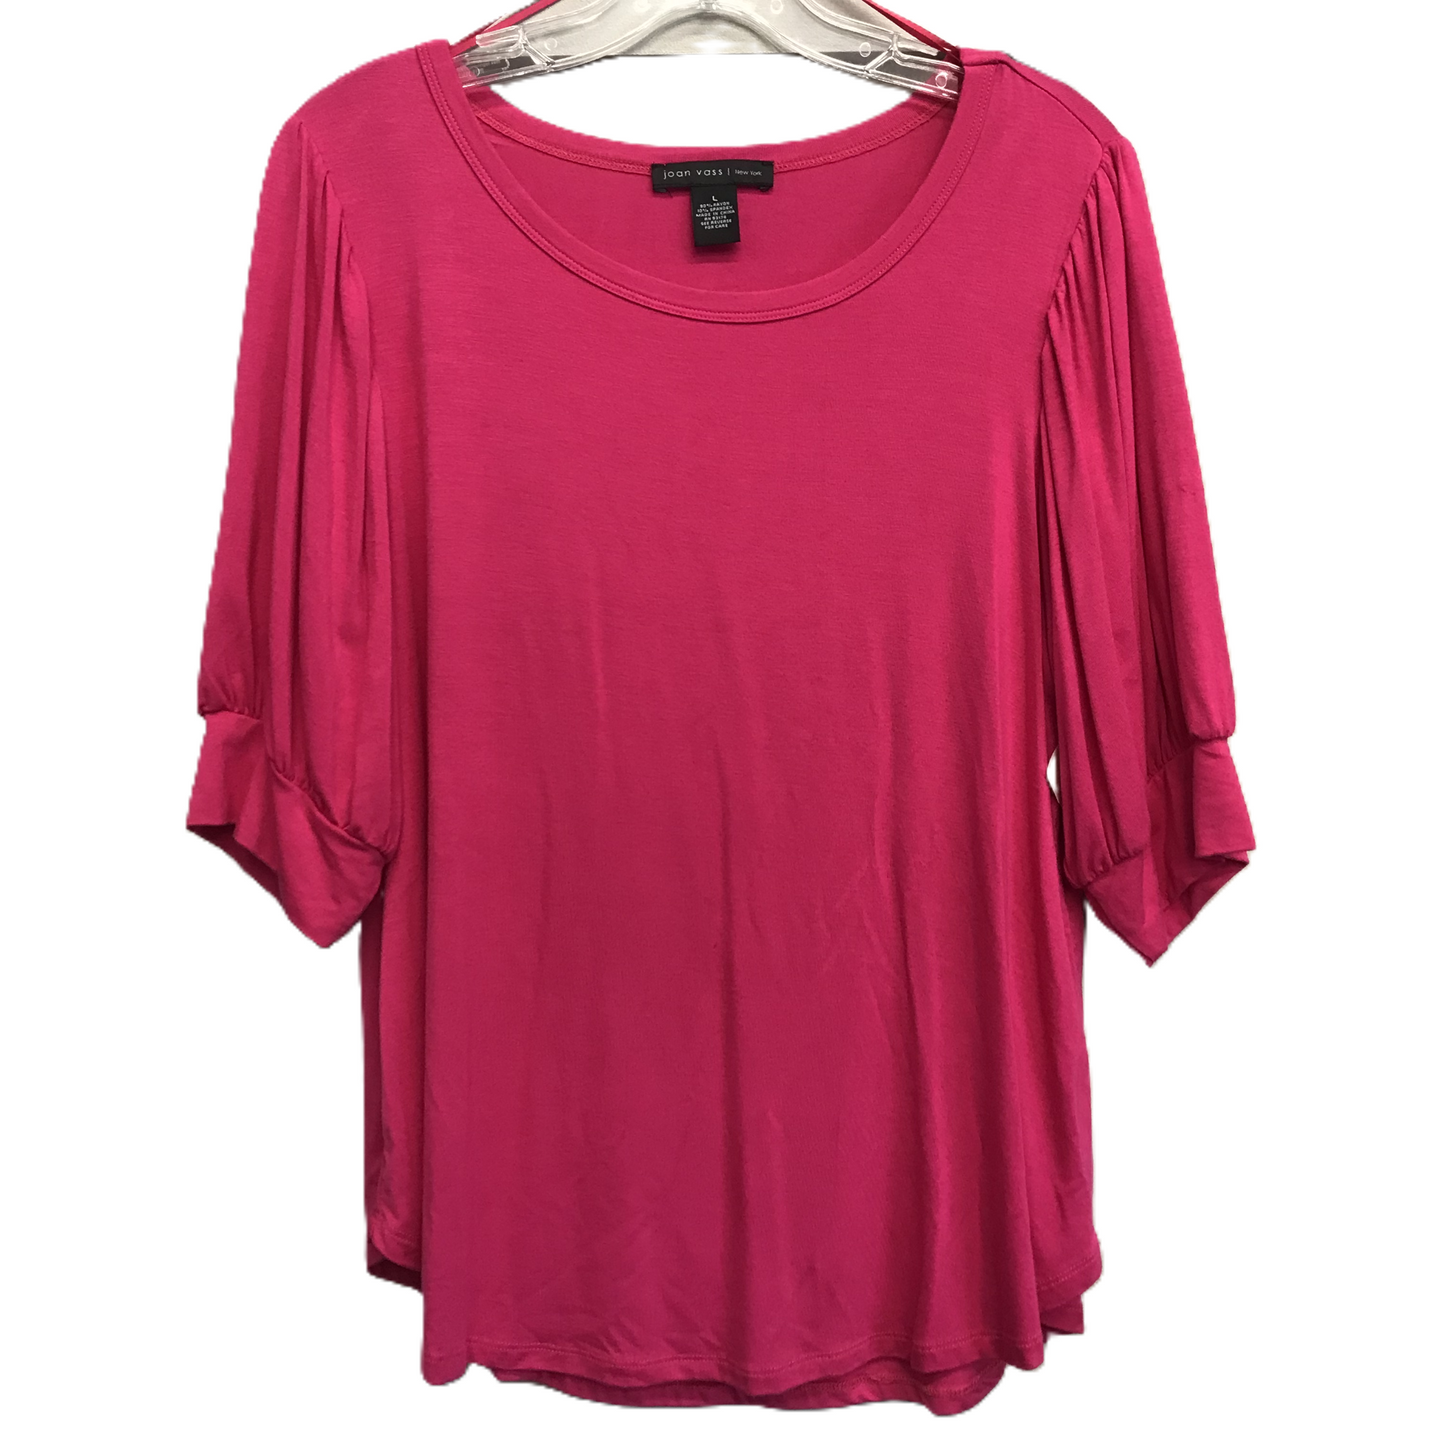 Pink Top Short Sleeve Basic By Joan Vass, Size: L